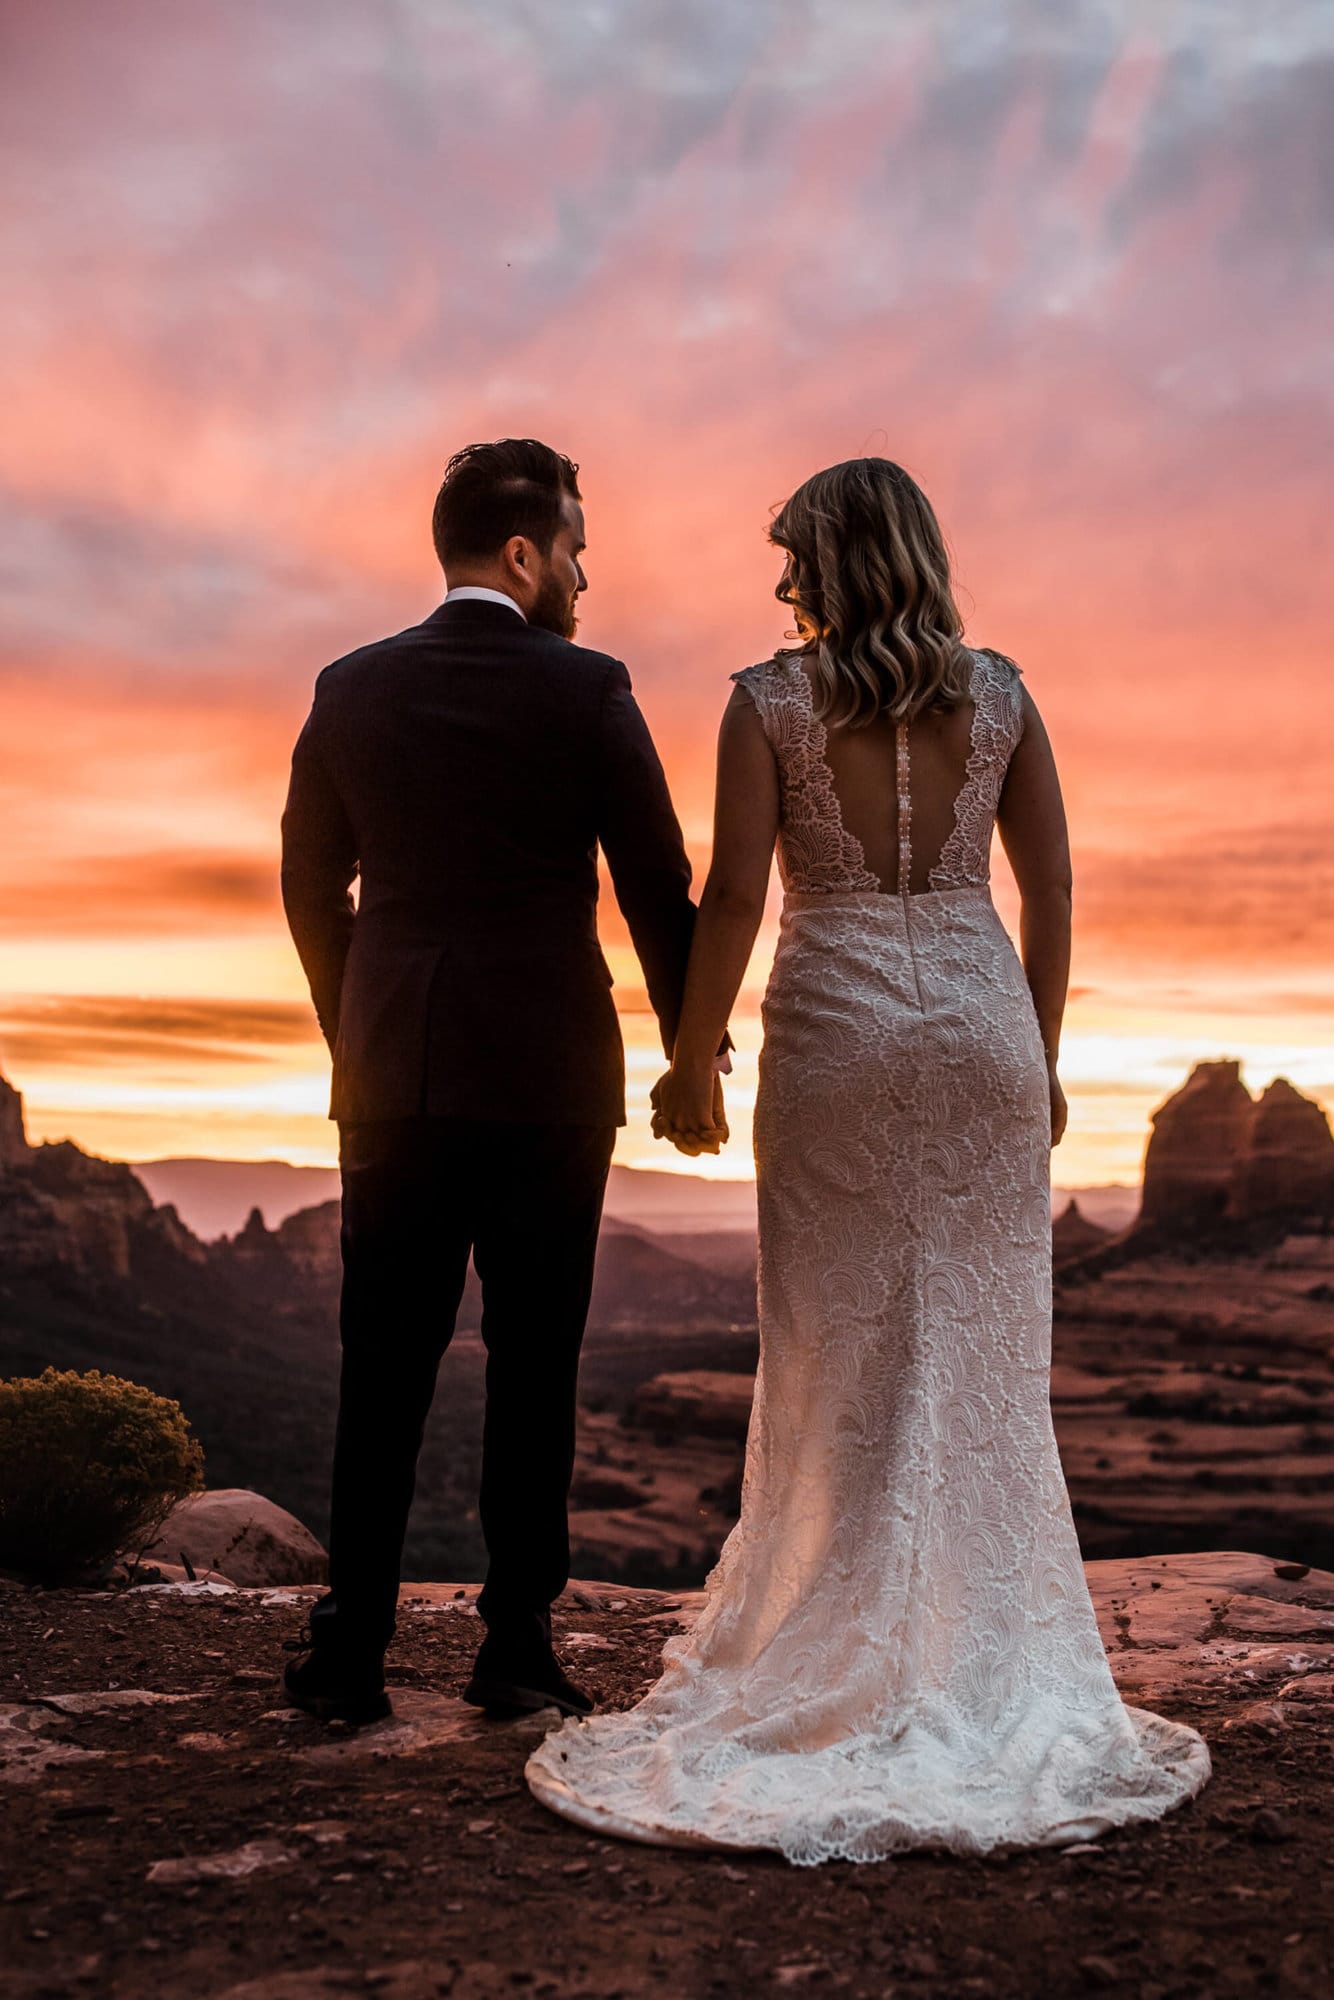 You have to consider these six epic places to elope in Arizona! If you love the desert vibes and are curious where you could tie the knot read this.